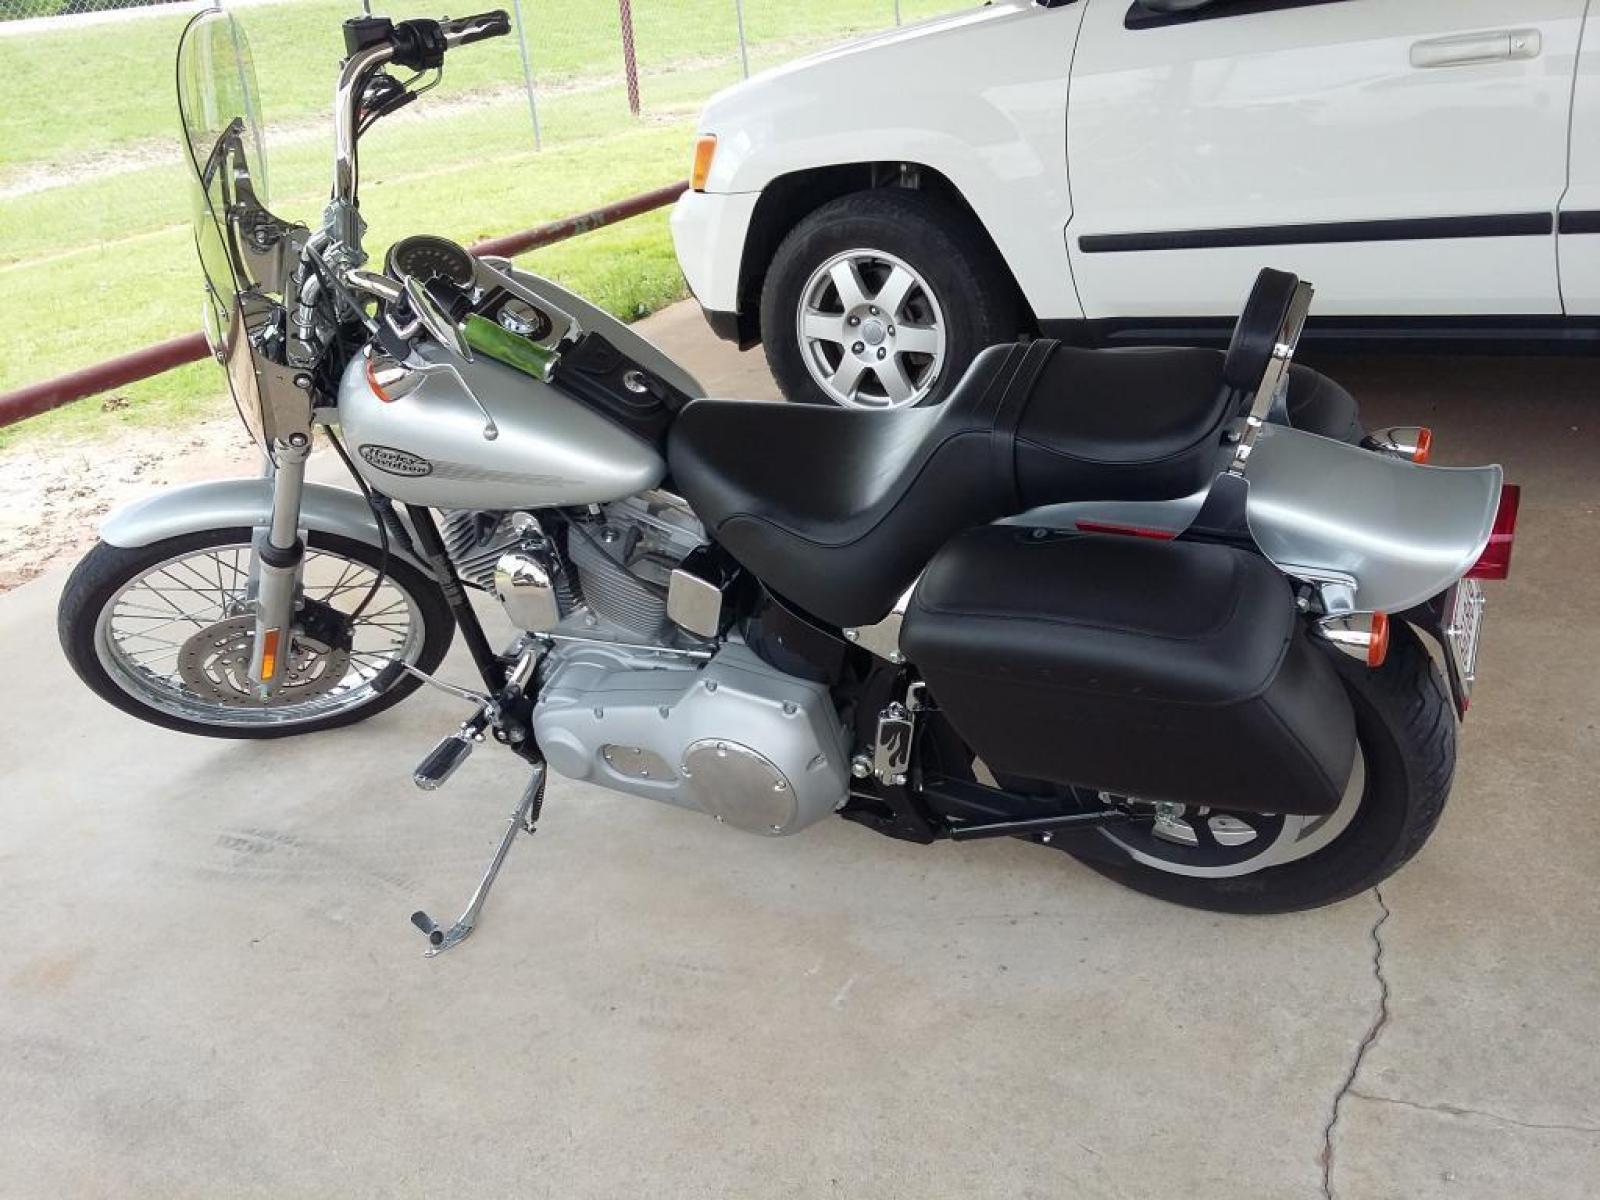 2004 Silver Harley-Davidson FXSTI - (1HD1BVB164Y) with an 1450CC engine, Standard transmission, located at 17760 HWY 62, MORRIS, 74445, 35.609104, -95.877060 - 2004 HARLEY-DAVIDSON FXSTI SOFTAIL STANDARD 1450CC FEATURES HARLEY SADDLEBAGS, AN ACCESSORY BAG ON THE TANK, SILVER POWDER-COATED ENGINE AND COVERS, HARDTAIL STYLING WITH HIDDEN HORIZONTAL REAR SHOCKS, BLACK HORSESHOE OIL TANK, BOBTAIL FENDER, RAKED FRONT FORKS. ALWAYS GARAGE KEPT!! IT'S IN EXCELLE - Photo #8